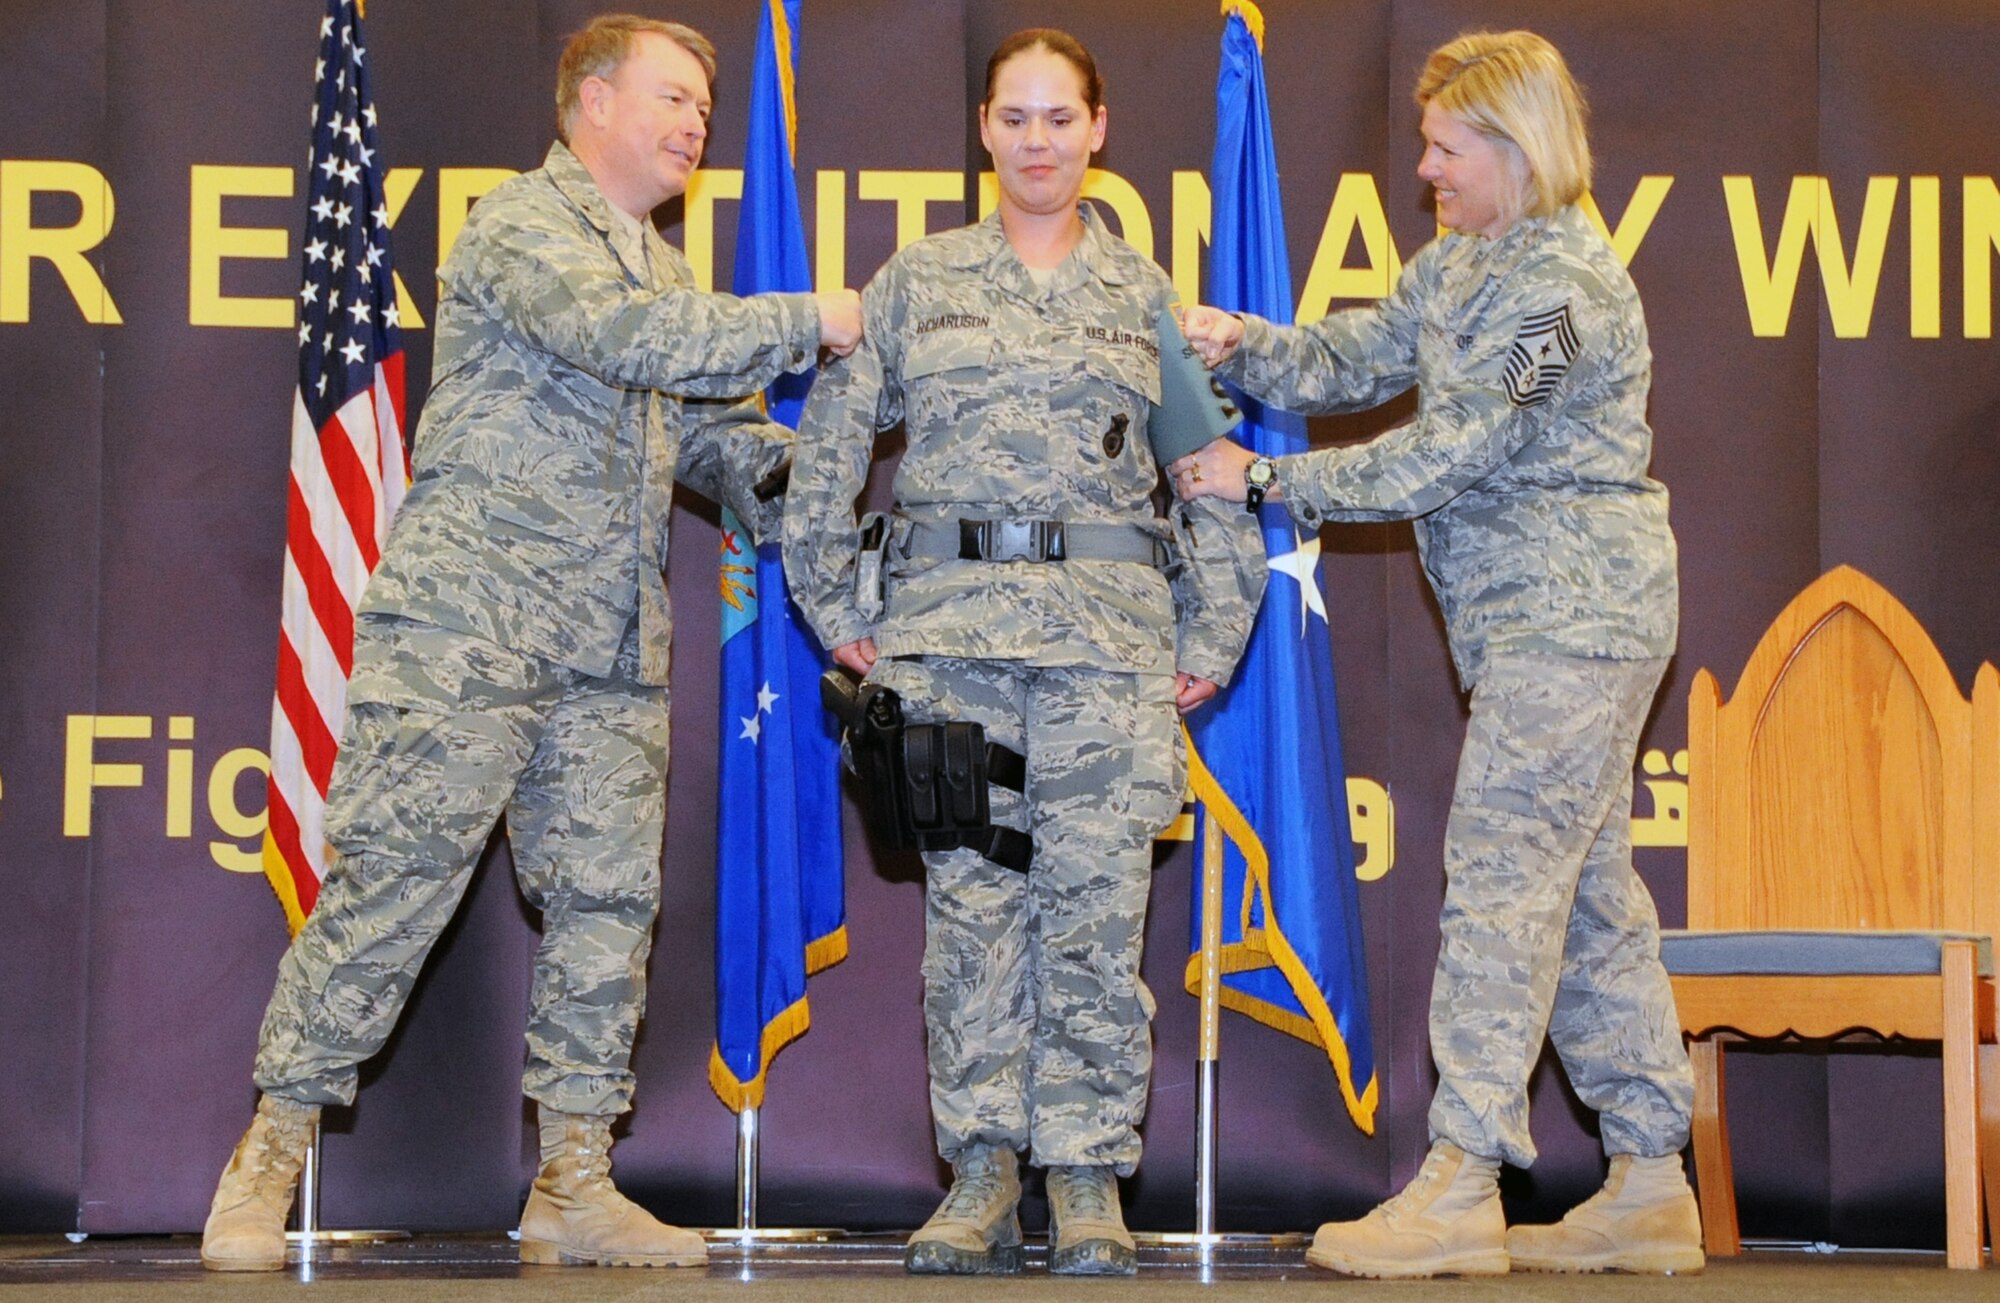 Brig. Gen. Bryan Benson (left), 380th Air Expeditionary Wing commander, and Chief Master Sgt. Suzan Sangster, 380th AEW command chief, tack new stripes on Tech. Sgt. Carrie Ann Richardson of the 380th Expeditionary Security Forces Squadron at a  base in Southwest Asia Feb. 1.  Sergeant Richardson was promoted to technical sergeant through the Stripes for Exceptional Performers Program by Electronic Systems Center Commander Lt. Gen. Ted Bowlds.  Sergeant Richardson is deployed from the 66th Security Forces Squadron at Hanscom AFB.  (U.S. Air Force Photoby Senior Airman Jenifer Calhoun)

 
